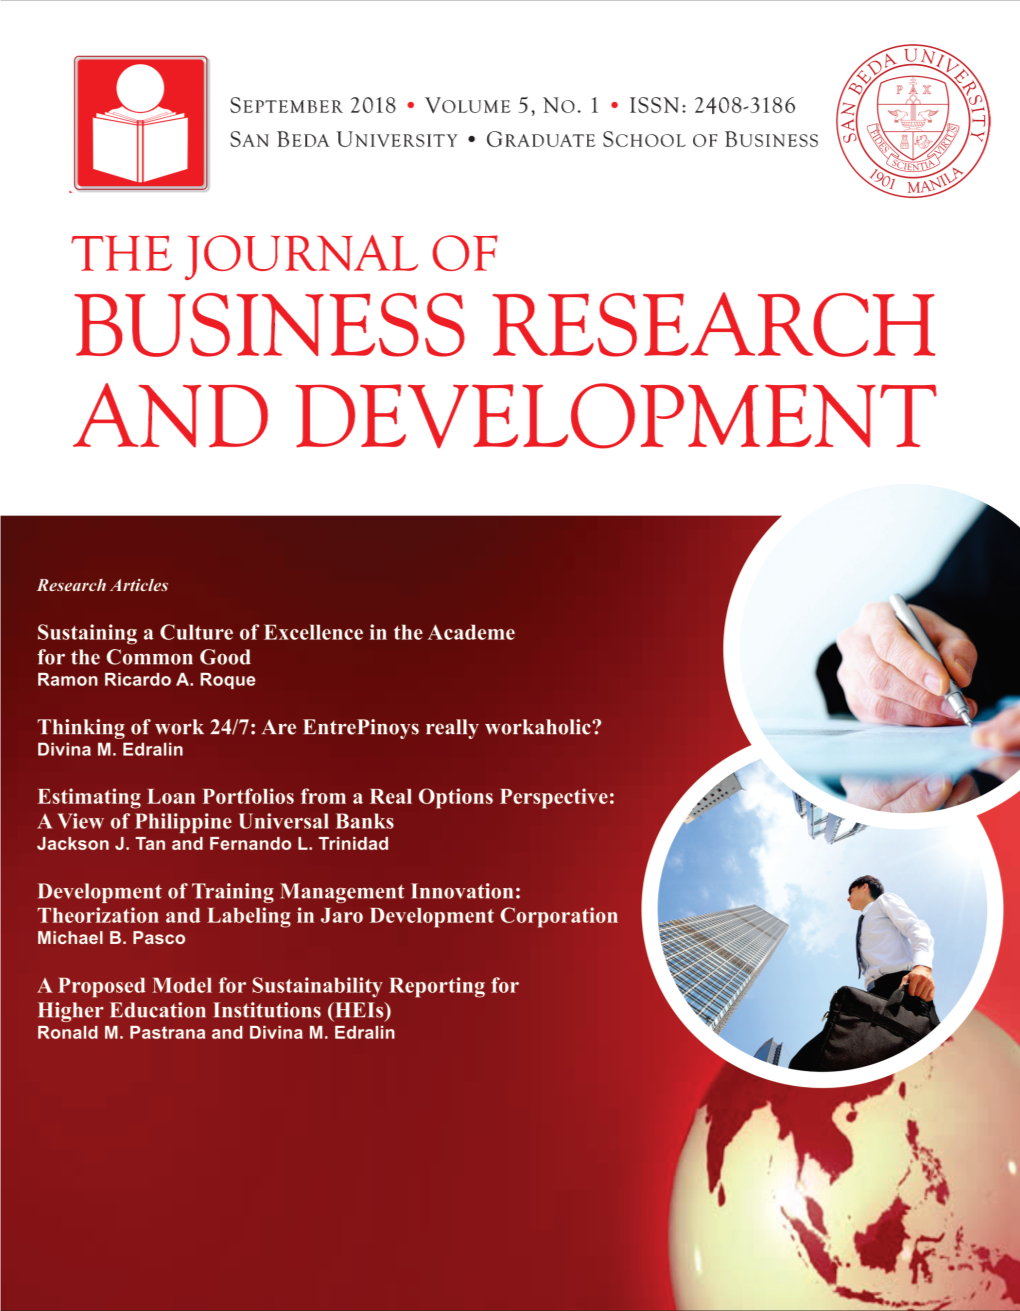 The Journal of Business Research and Development San Beda University Graduate School of Business